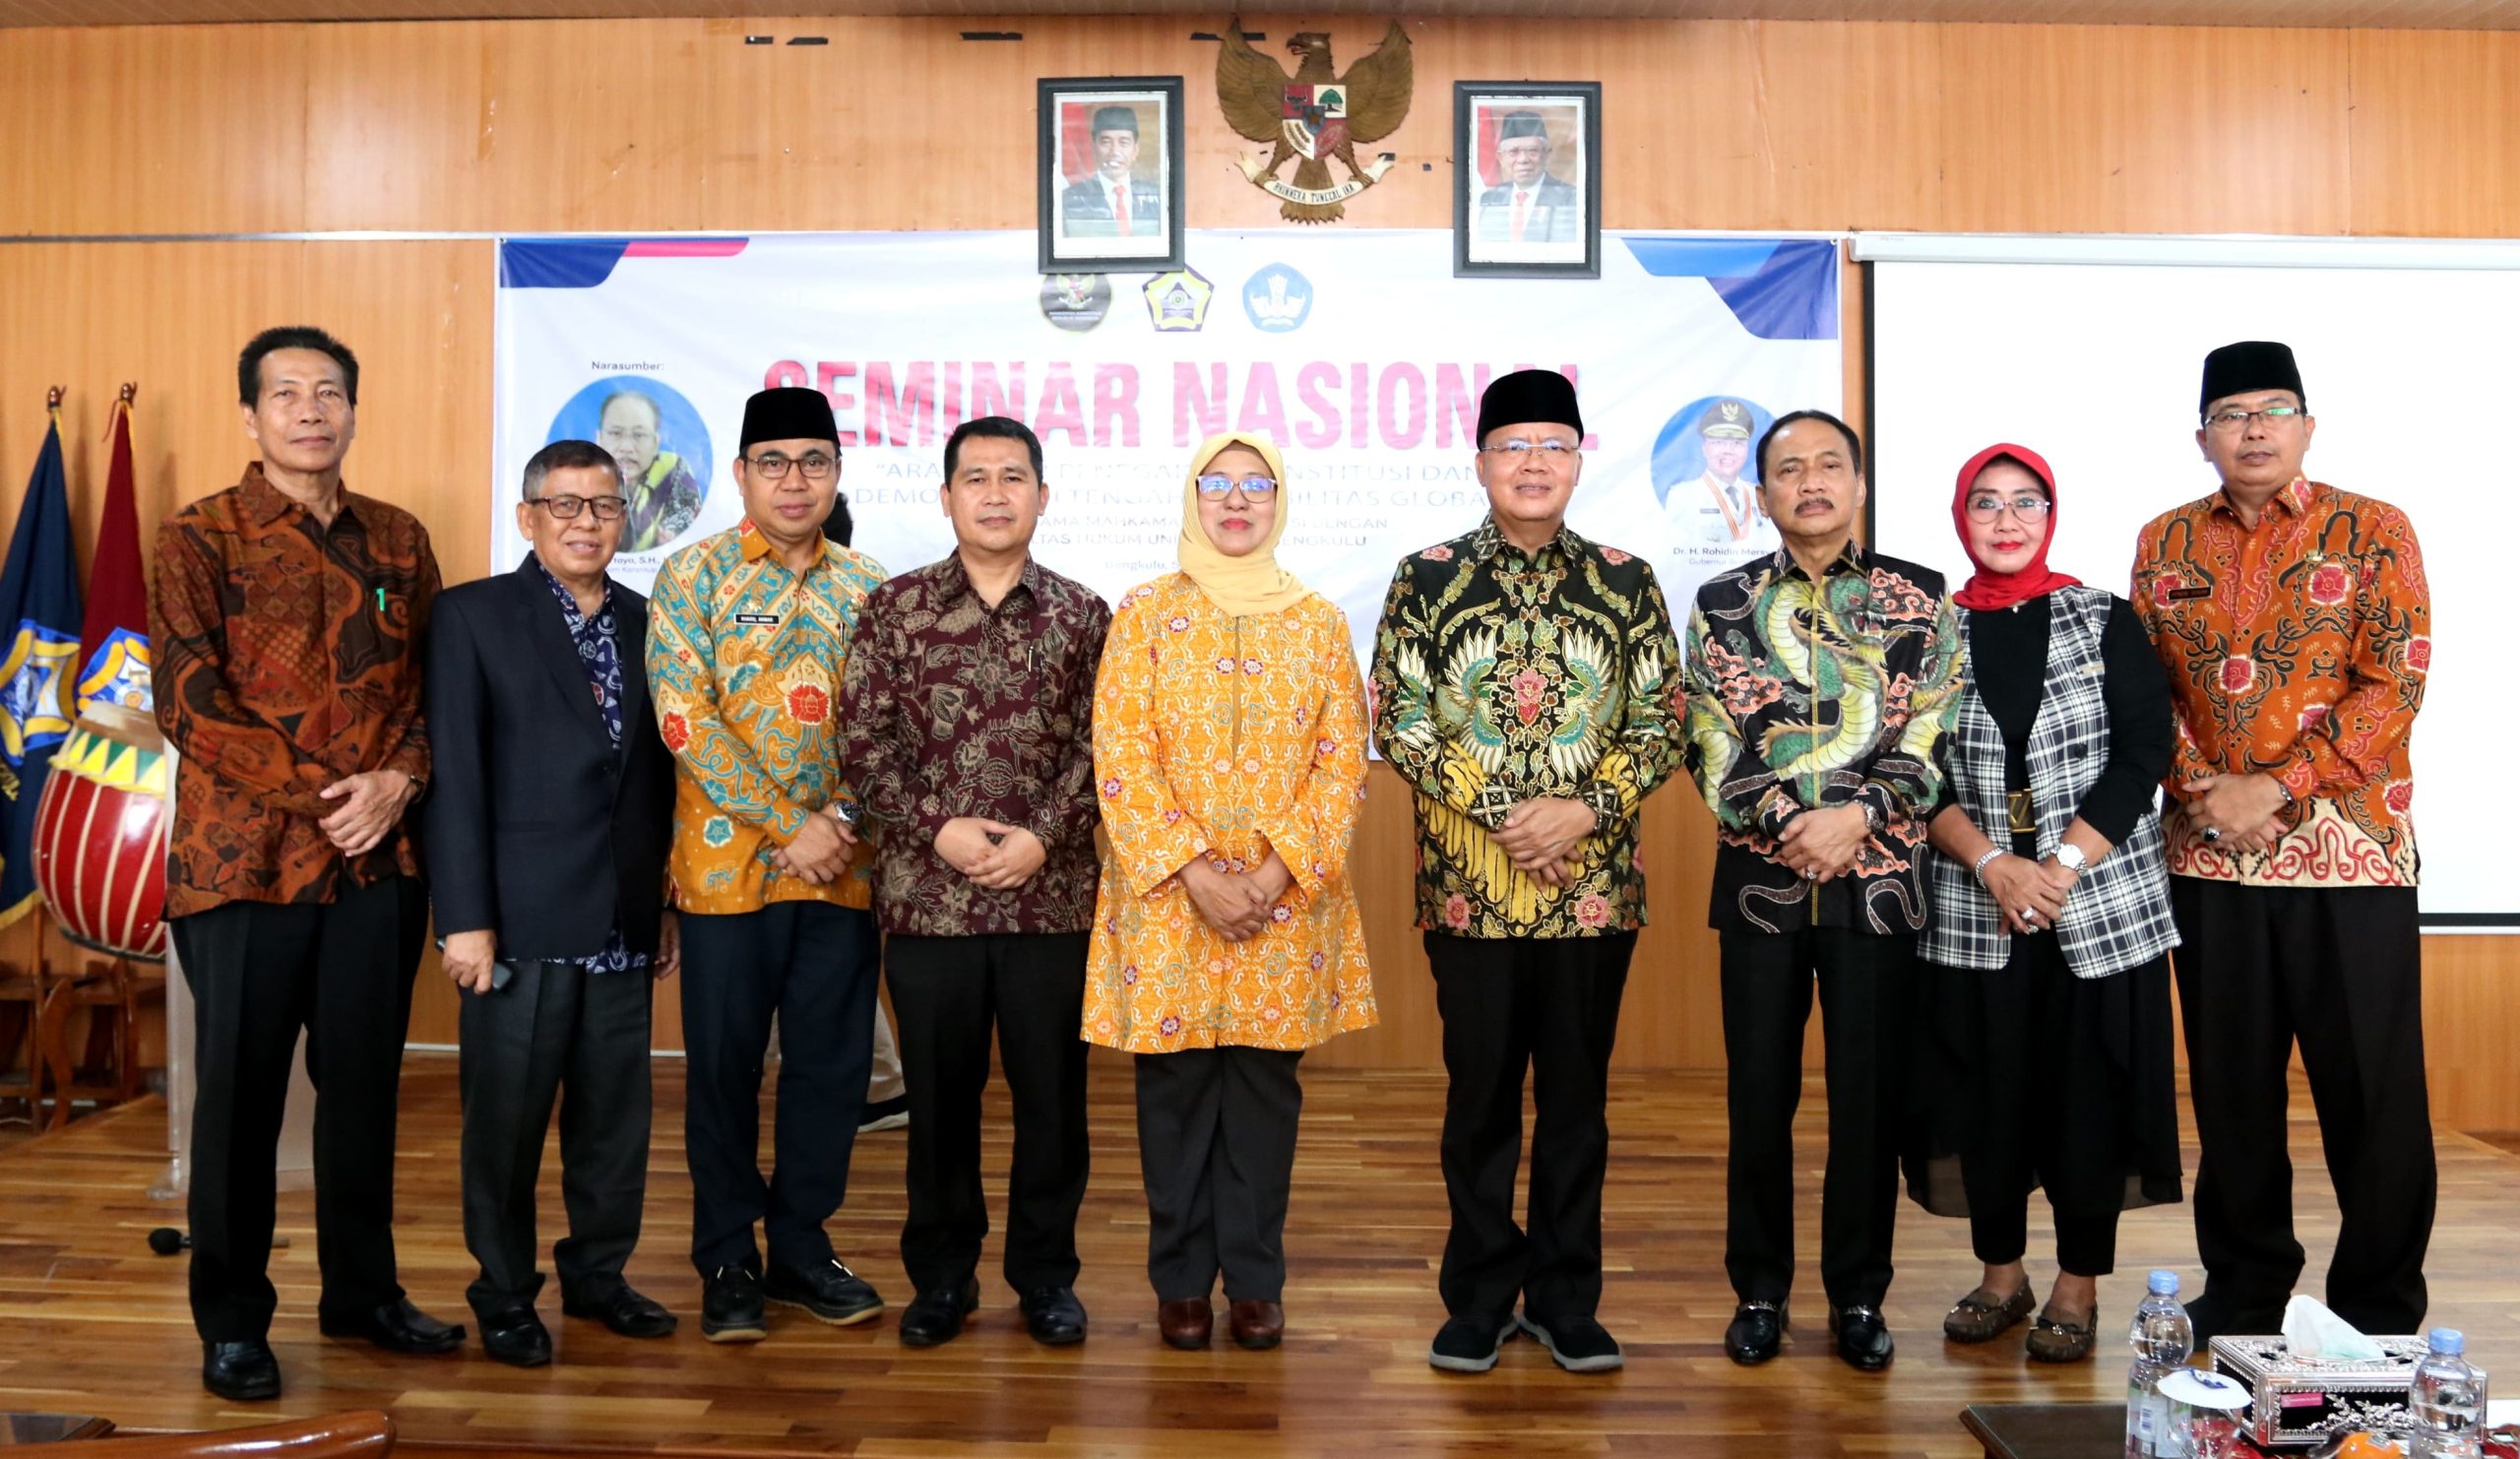 The Faculty of Law, University of Bengkulu, held a national seminar on New Directions for Upholding the Constitution and Democracy amid Global Instability.